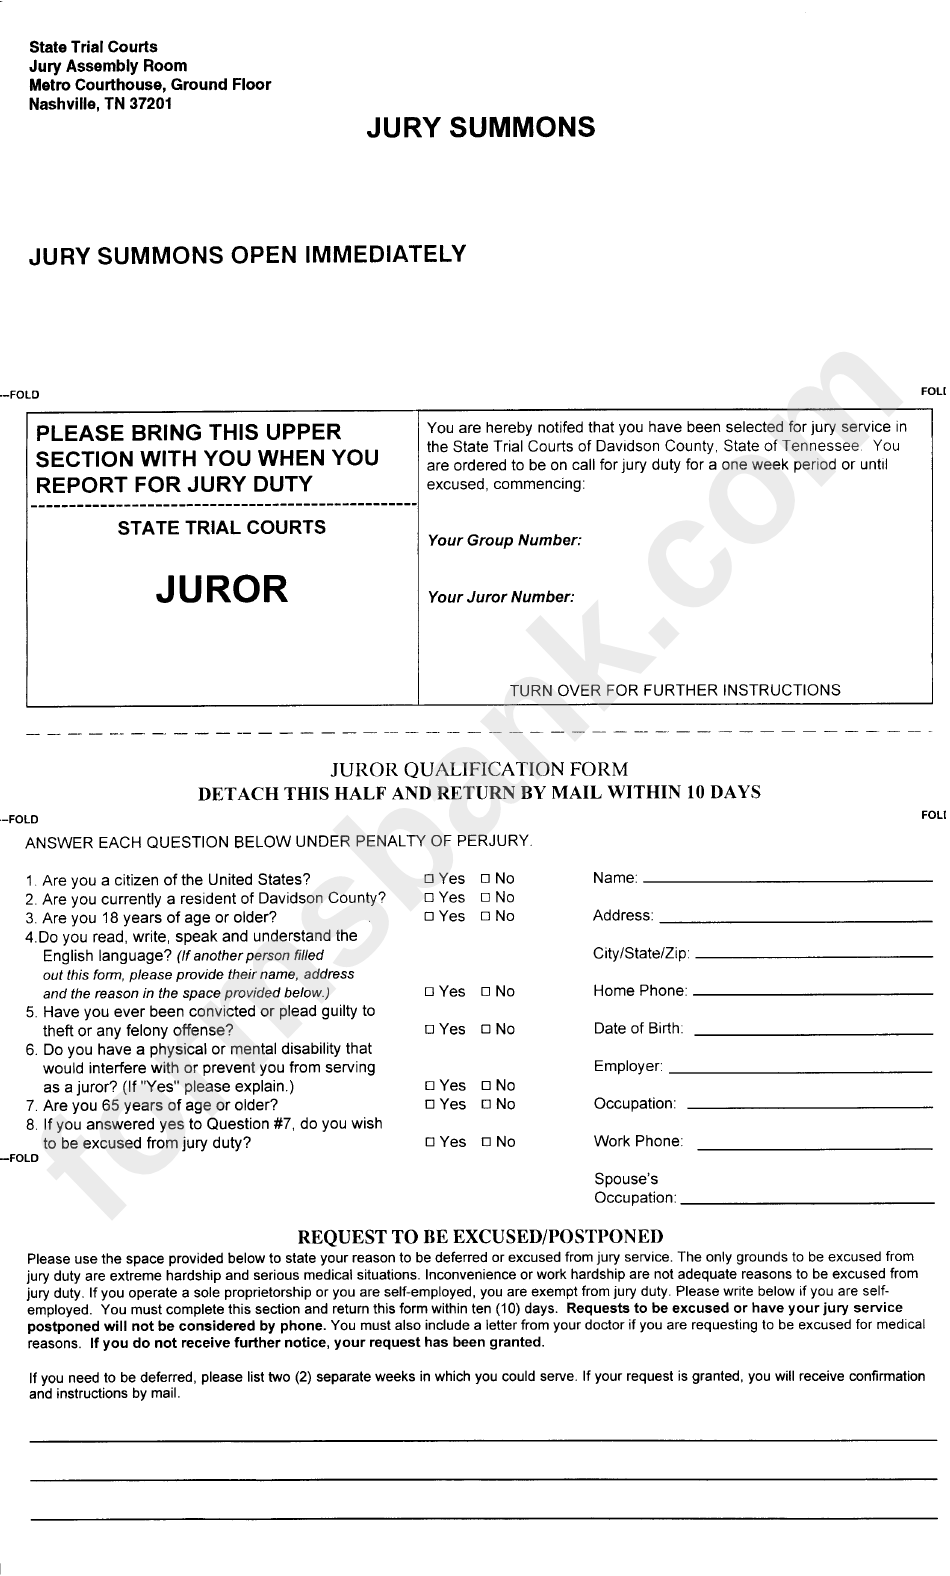 Juror Qualification Form State Trial Courts Of Davidson County